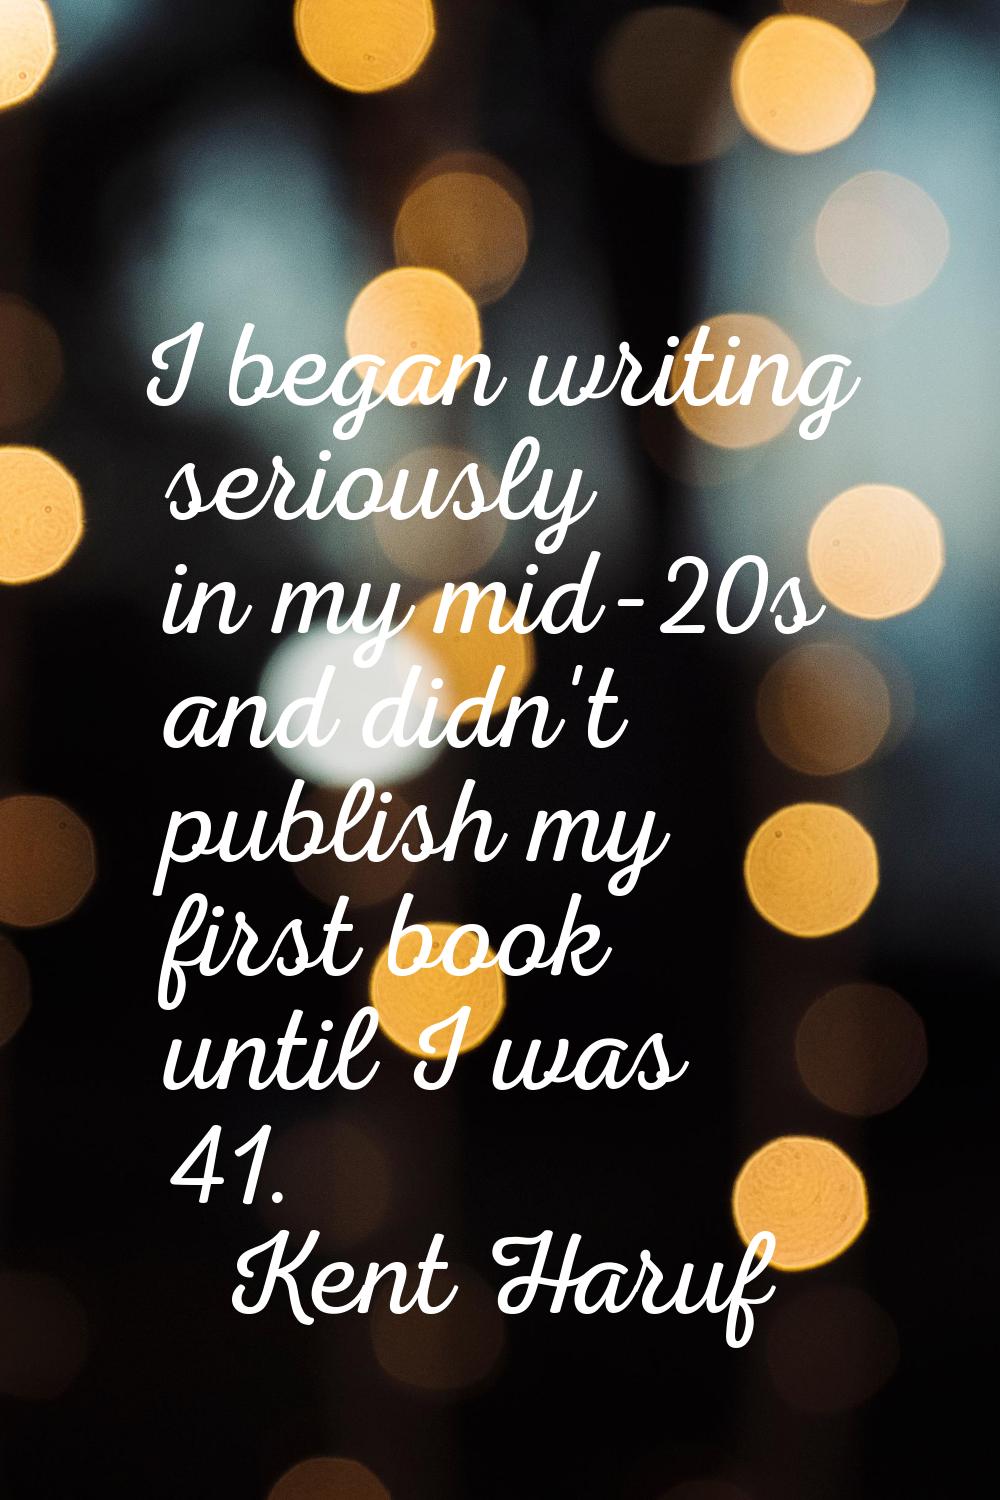 I began writing seriously in my mid-20s and didn't publish my first book until I was 41.